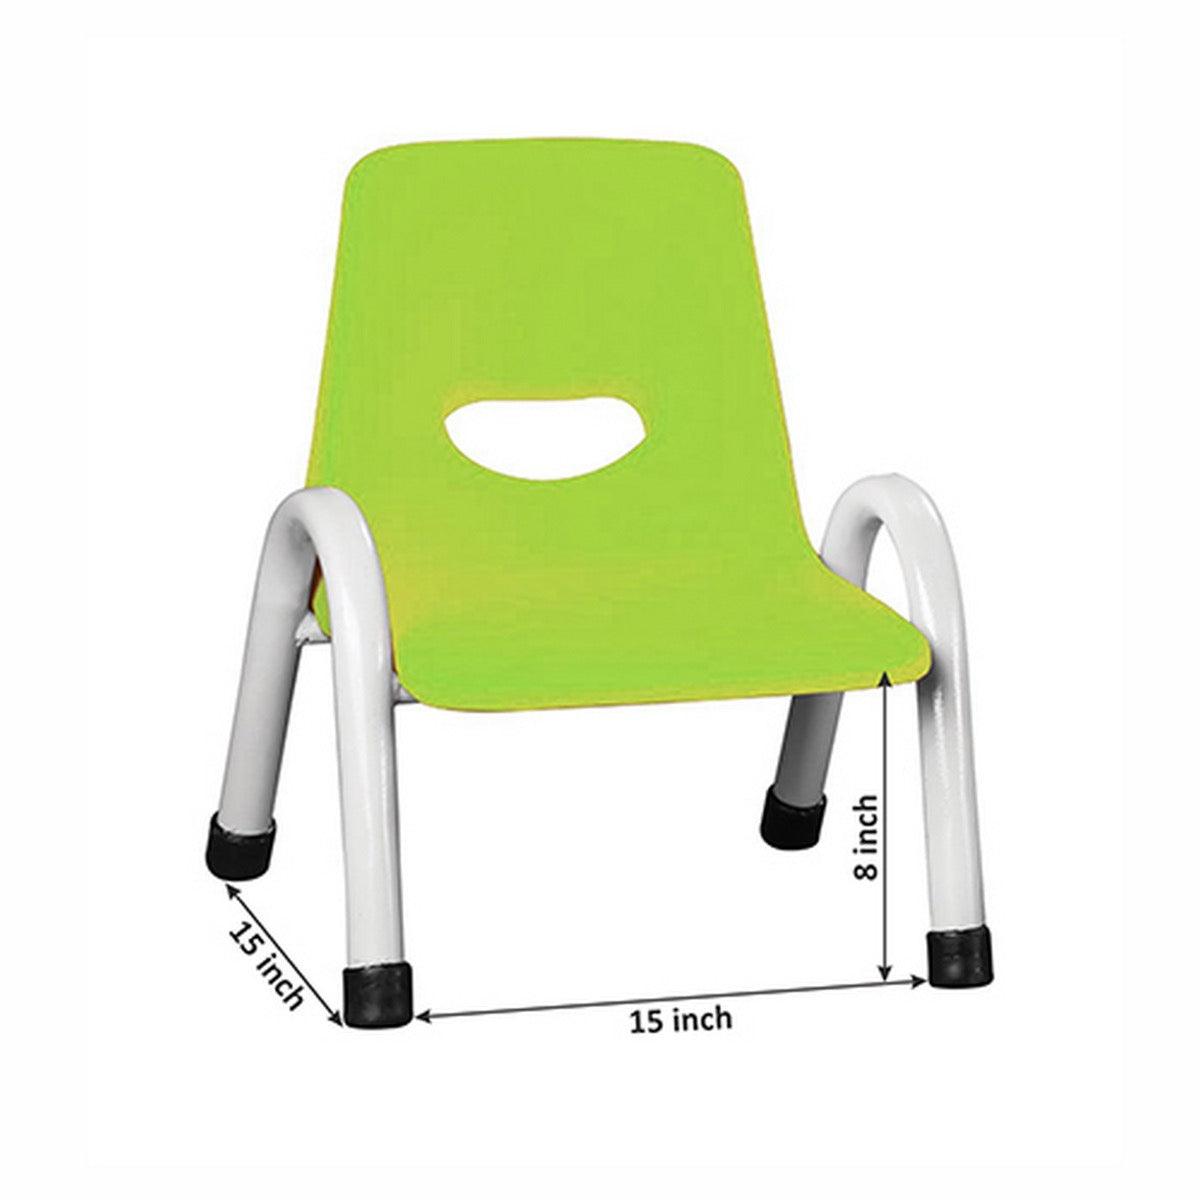 Ok Play Cute Chair Small, Study Chair, Perfect For Home, Creches And School, Parrot Green & Ivory White, 2 to 4 Years